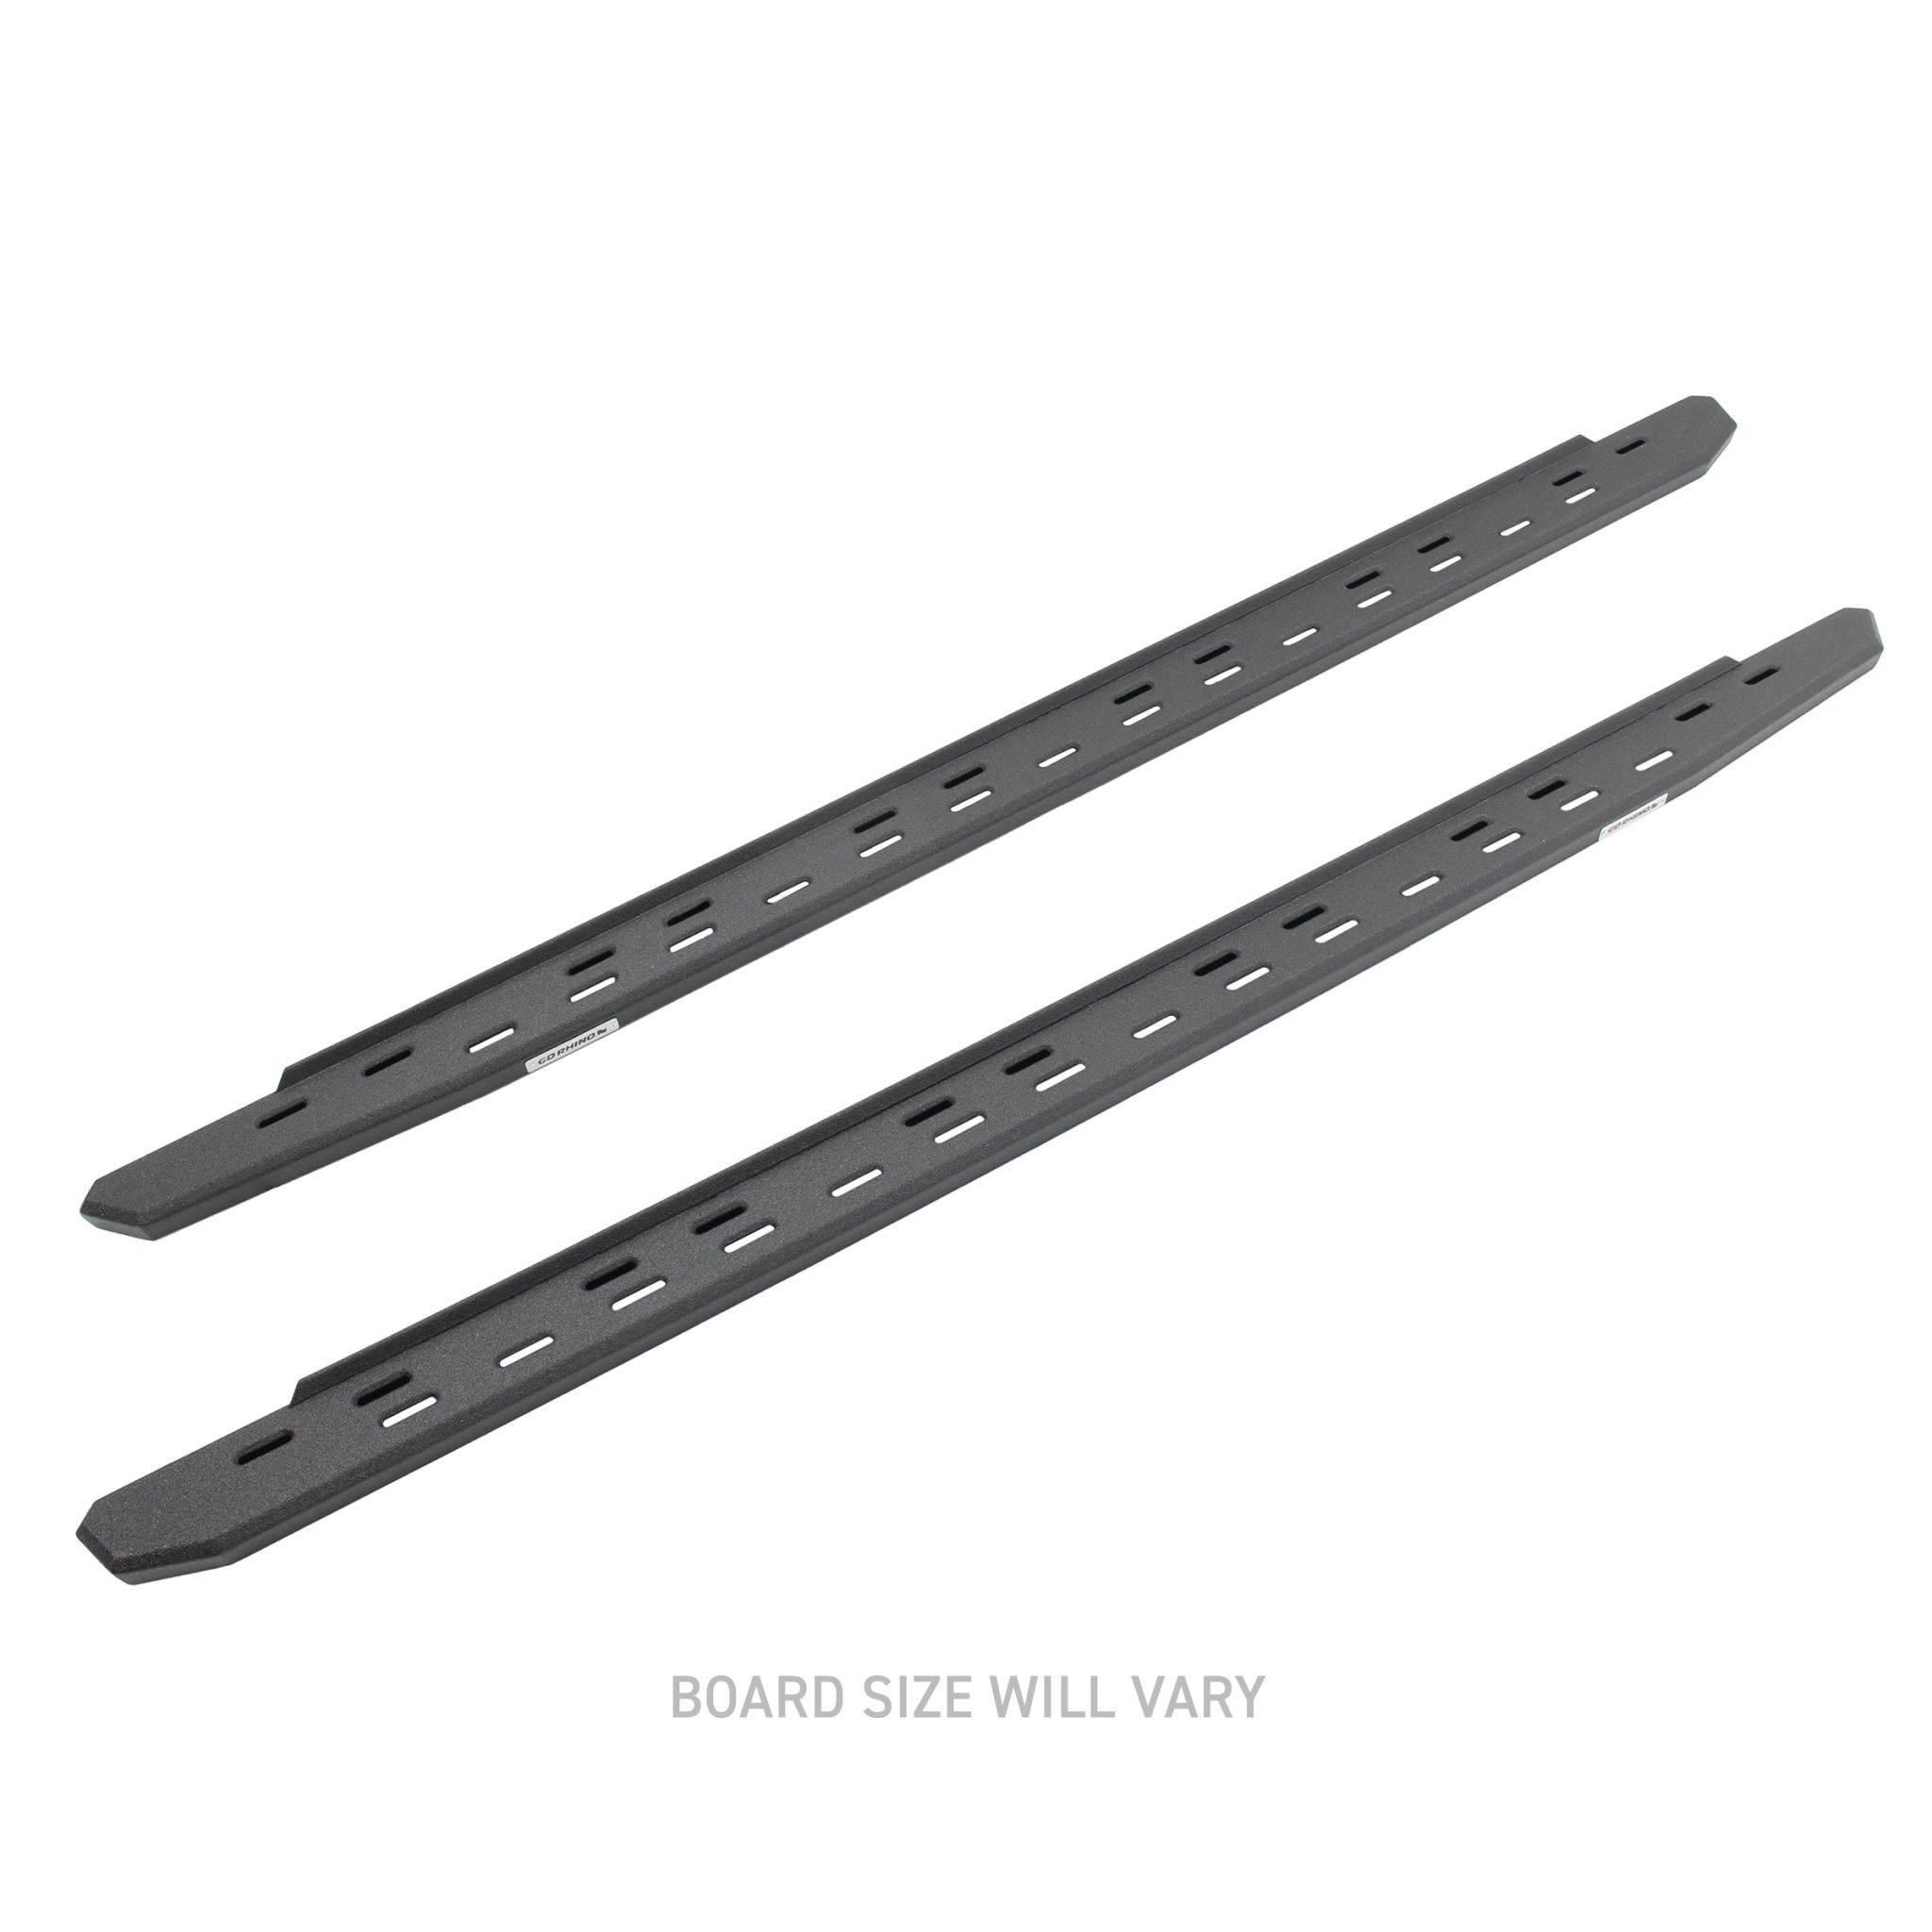 Go Rhino 69600080ST - RB30 Slim Line Running Boards - Boards Only - Protective Bedliner Coating